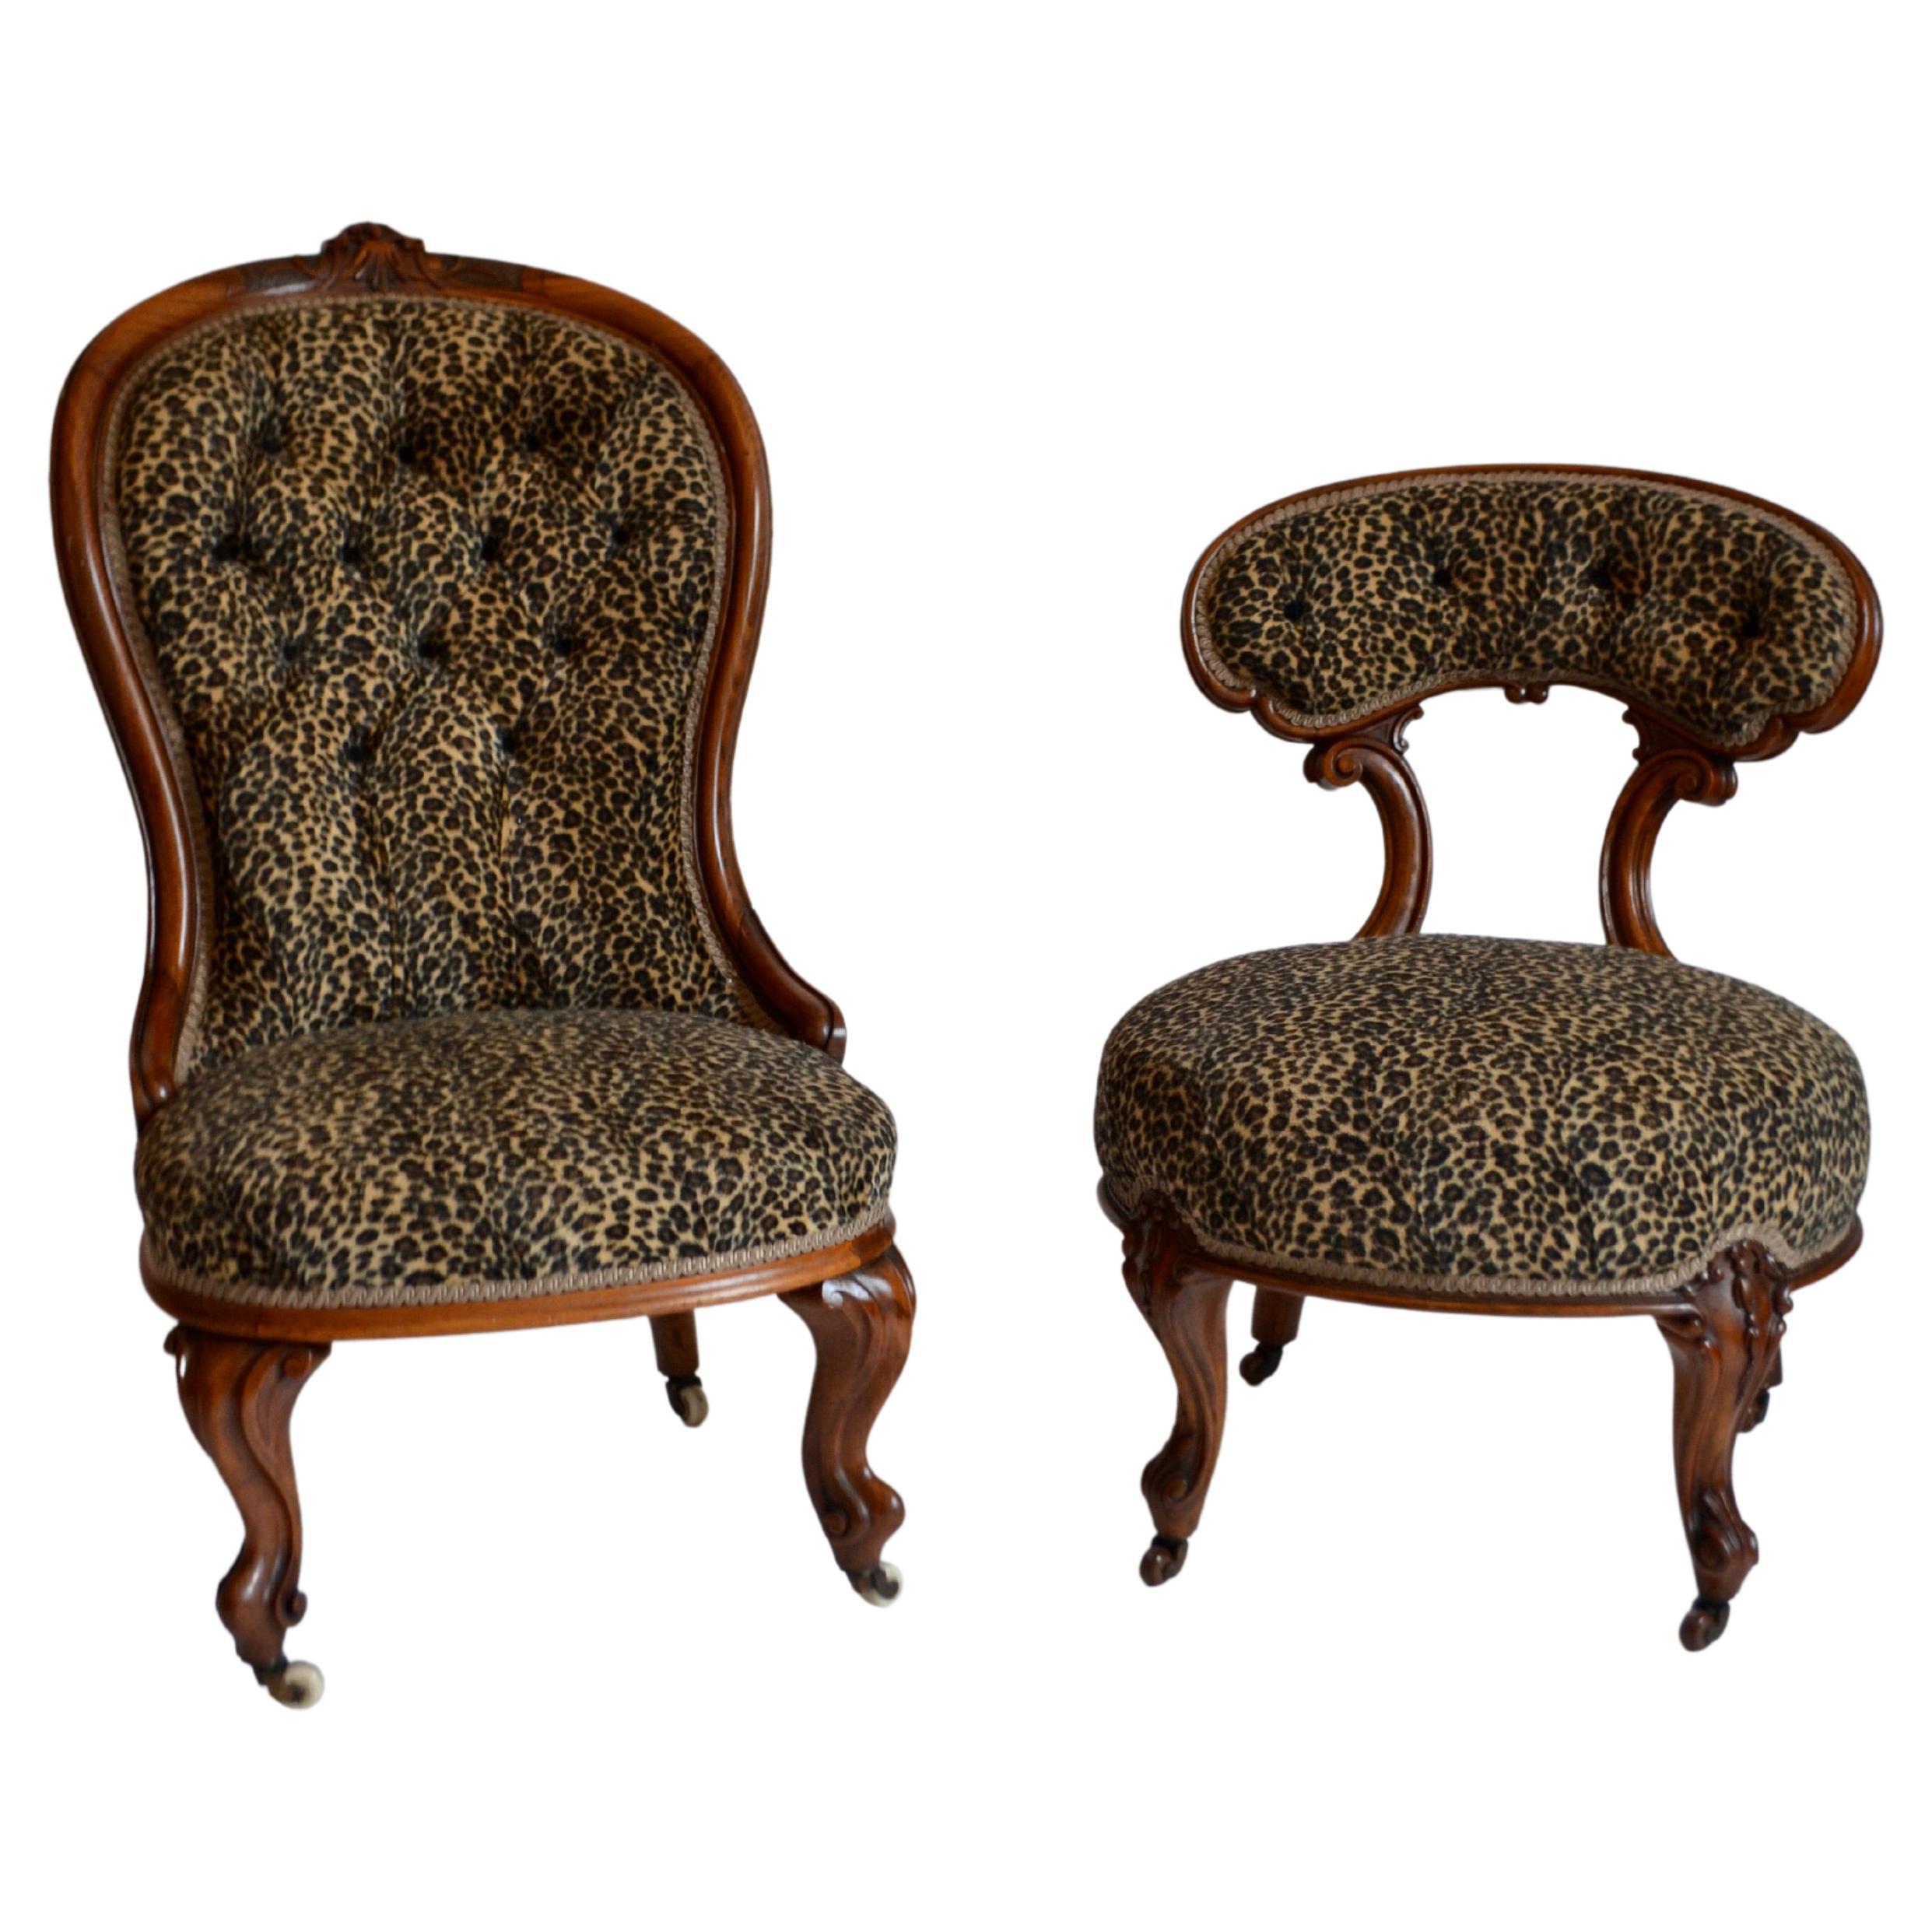 Pair of Victorian Walnut Chairs Upholstered in Faux Leopard Skin, 19th Century